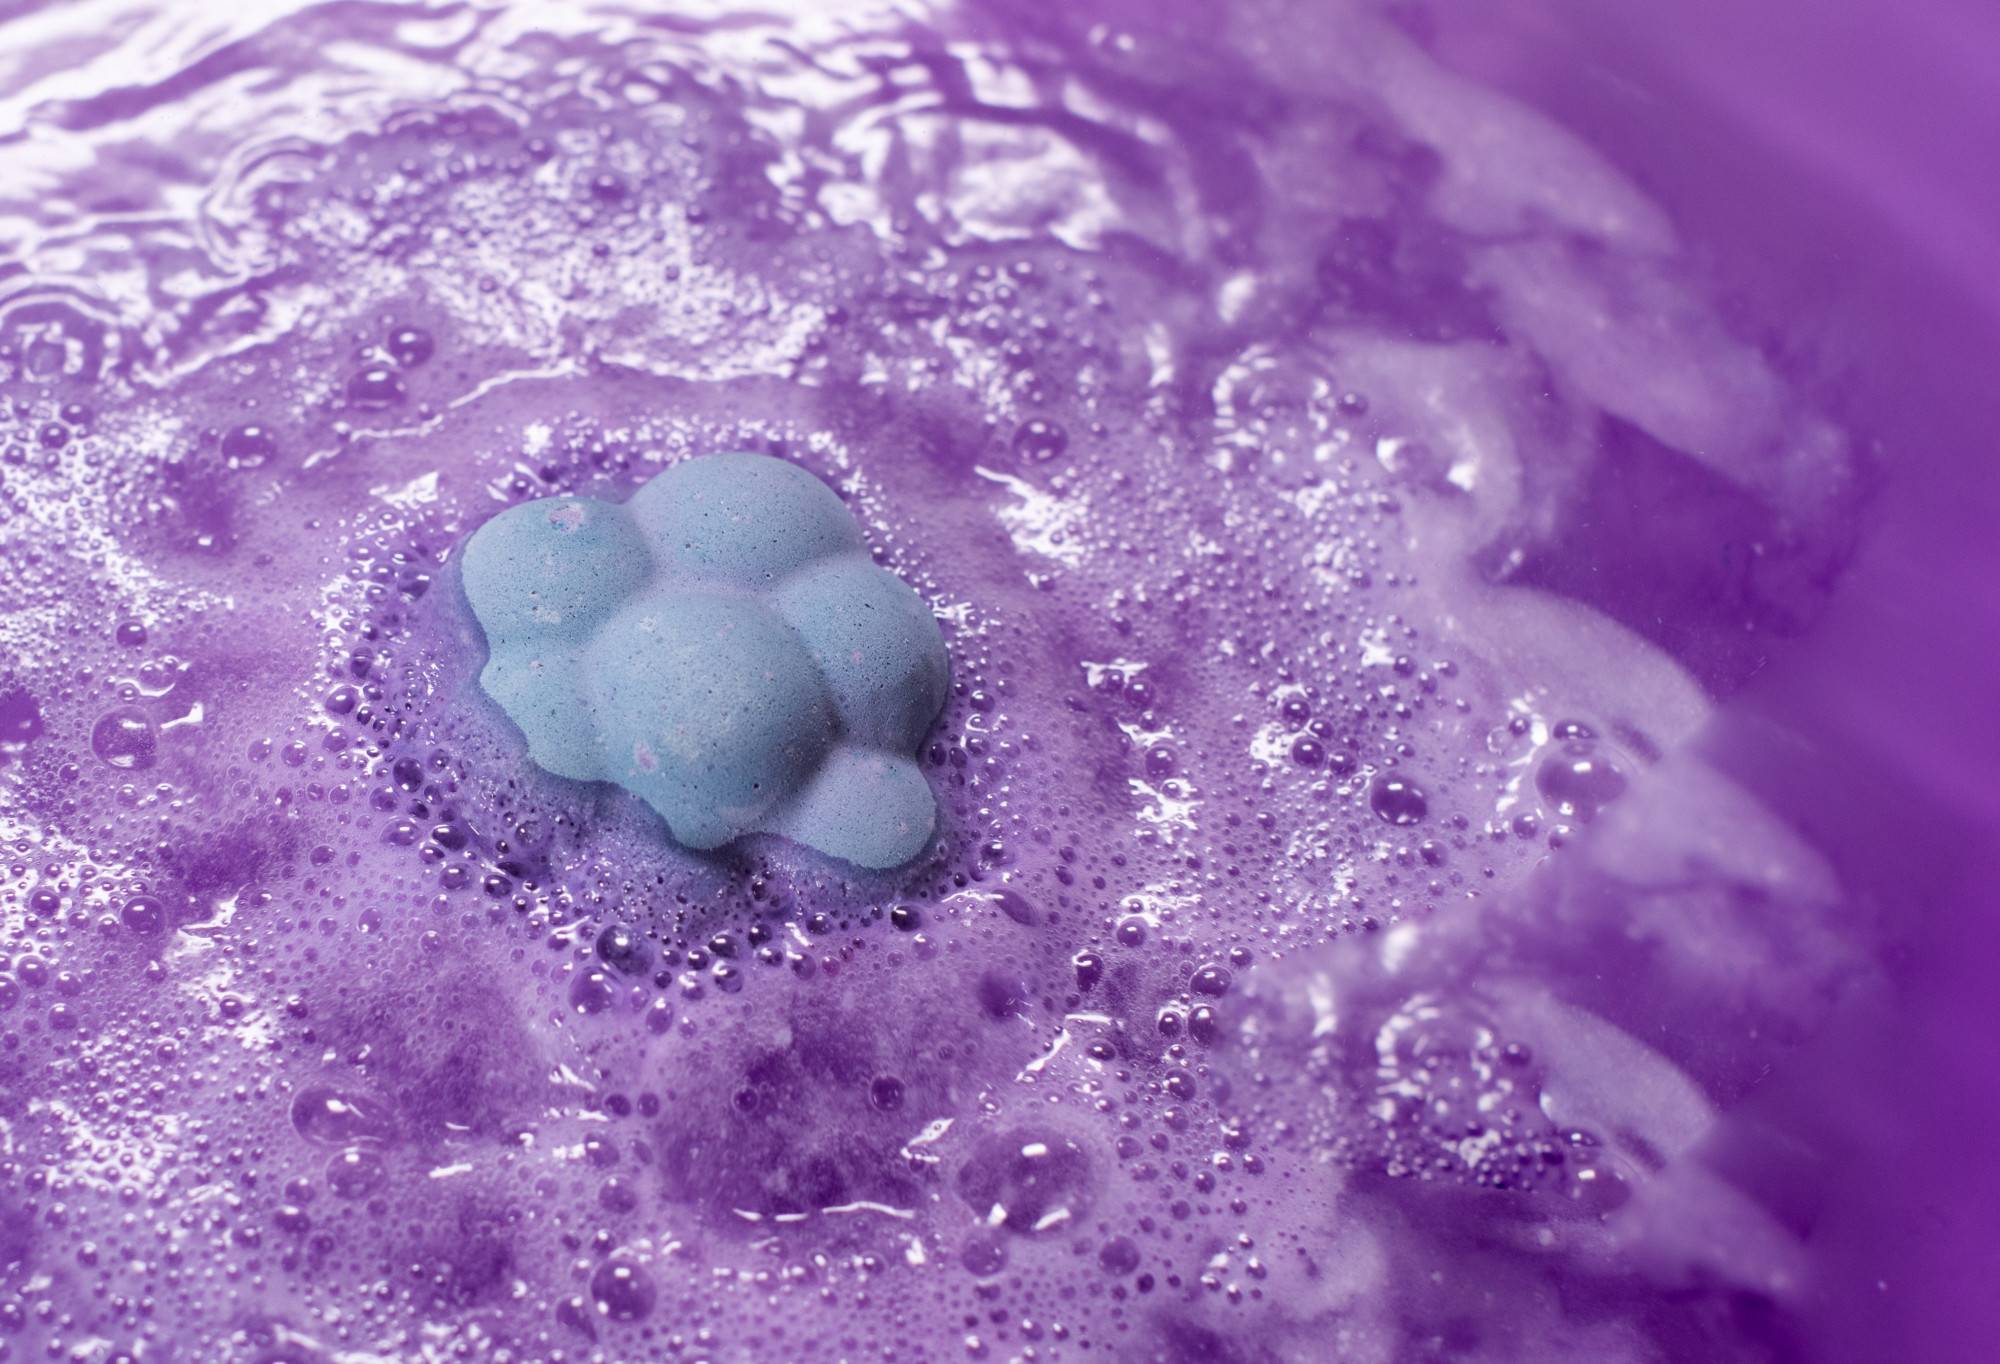 Blackberry, a baby blue, blackberry shaped bath bomb, peeking out from amethyst purple water, full of surface level bubbles.